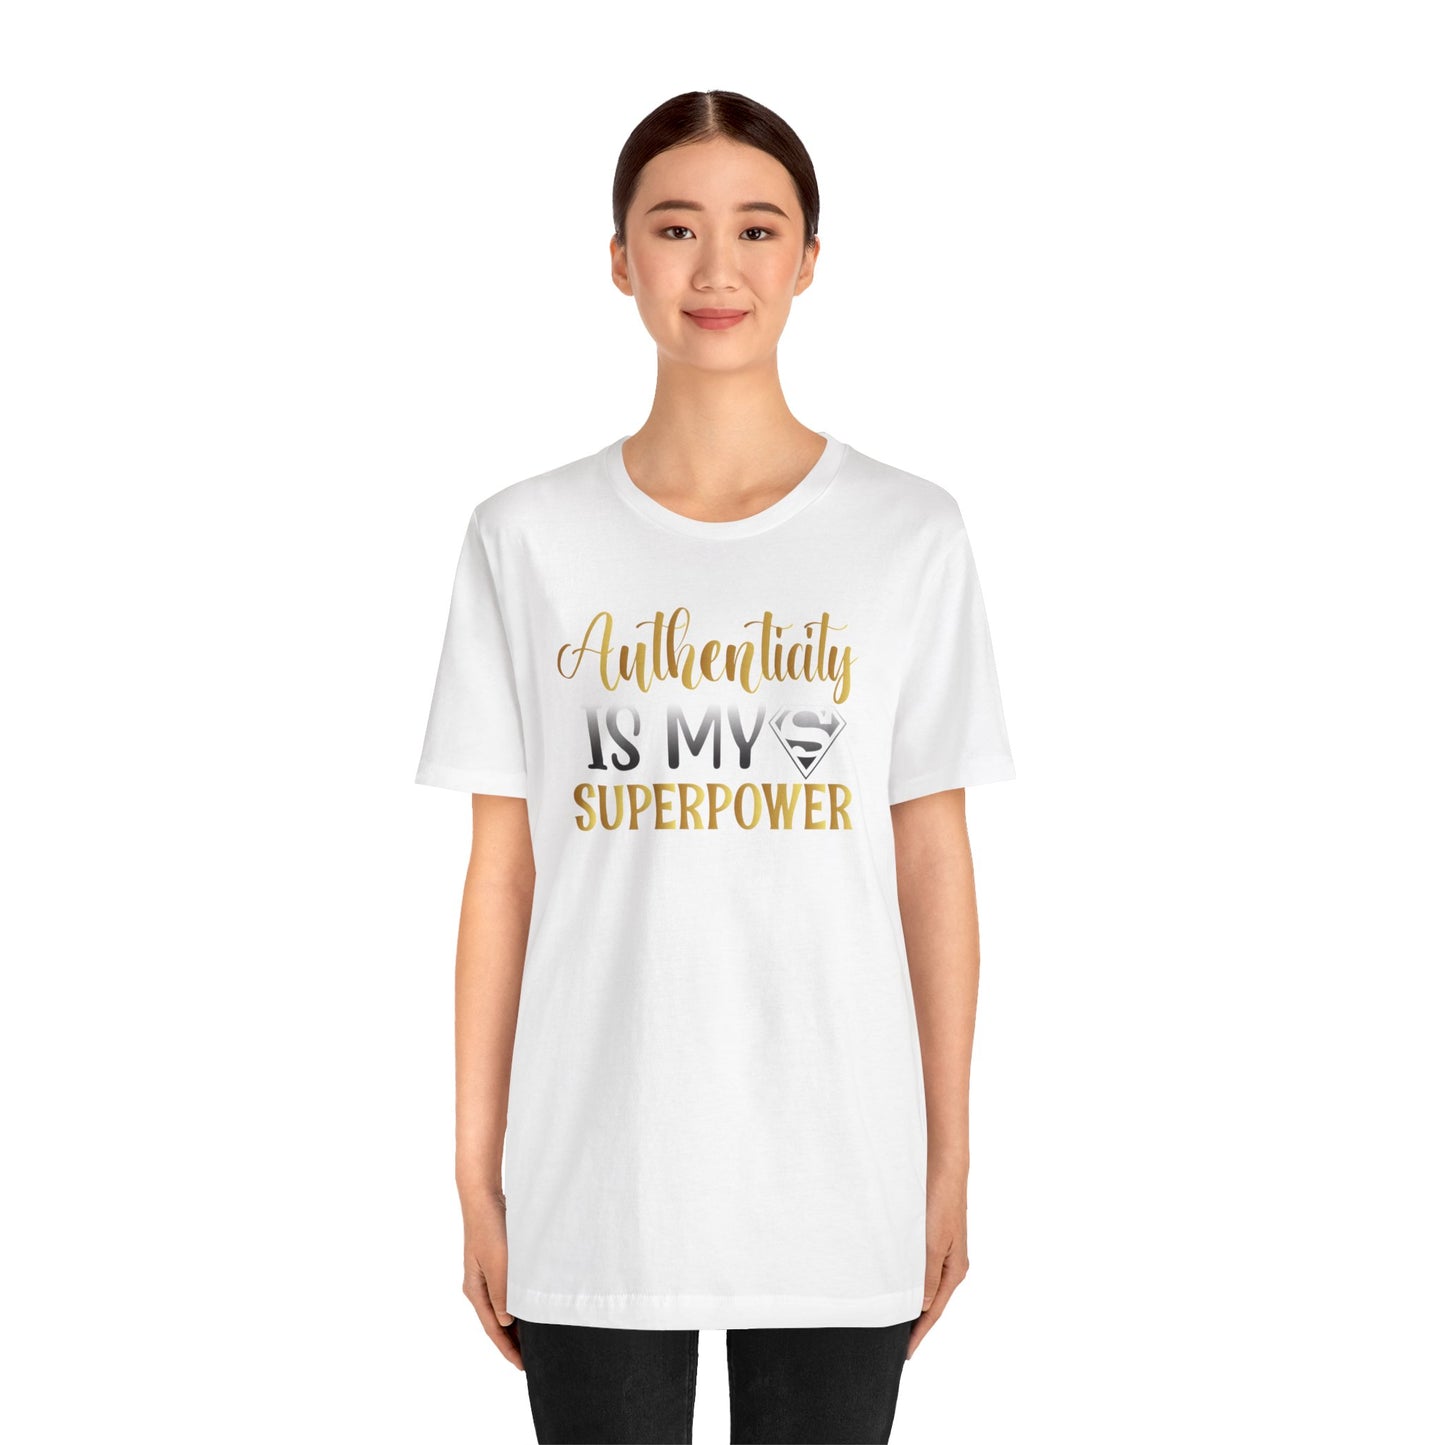 Authenticity is MY Superpower Short Sleeve Tee